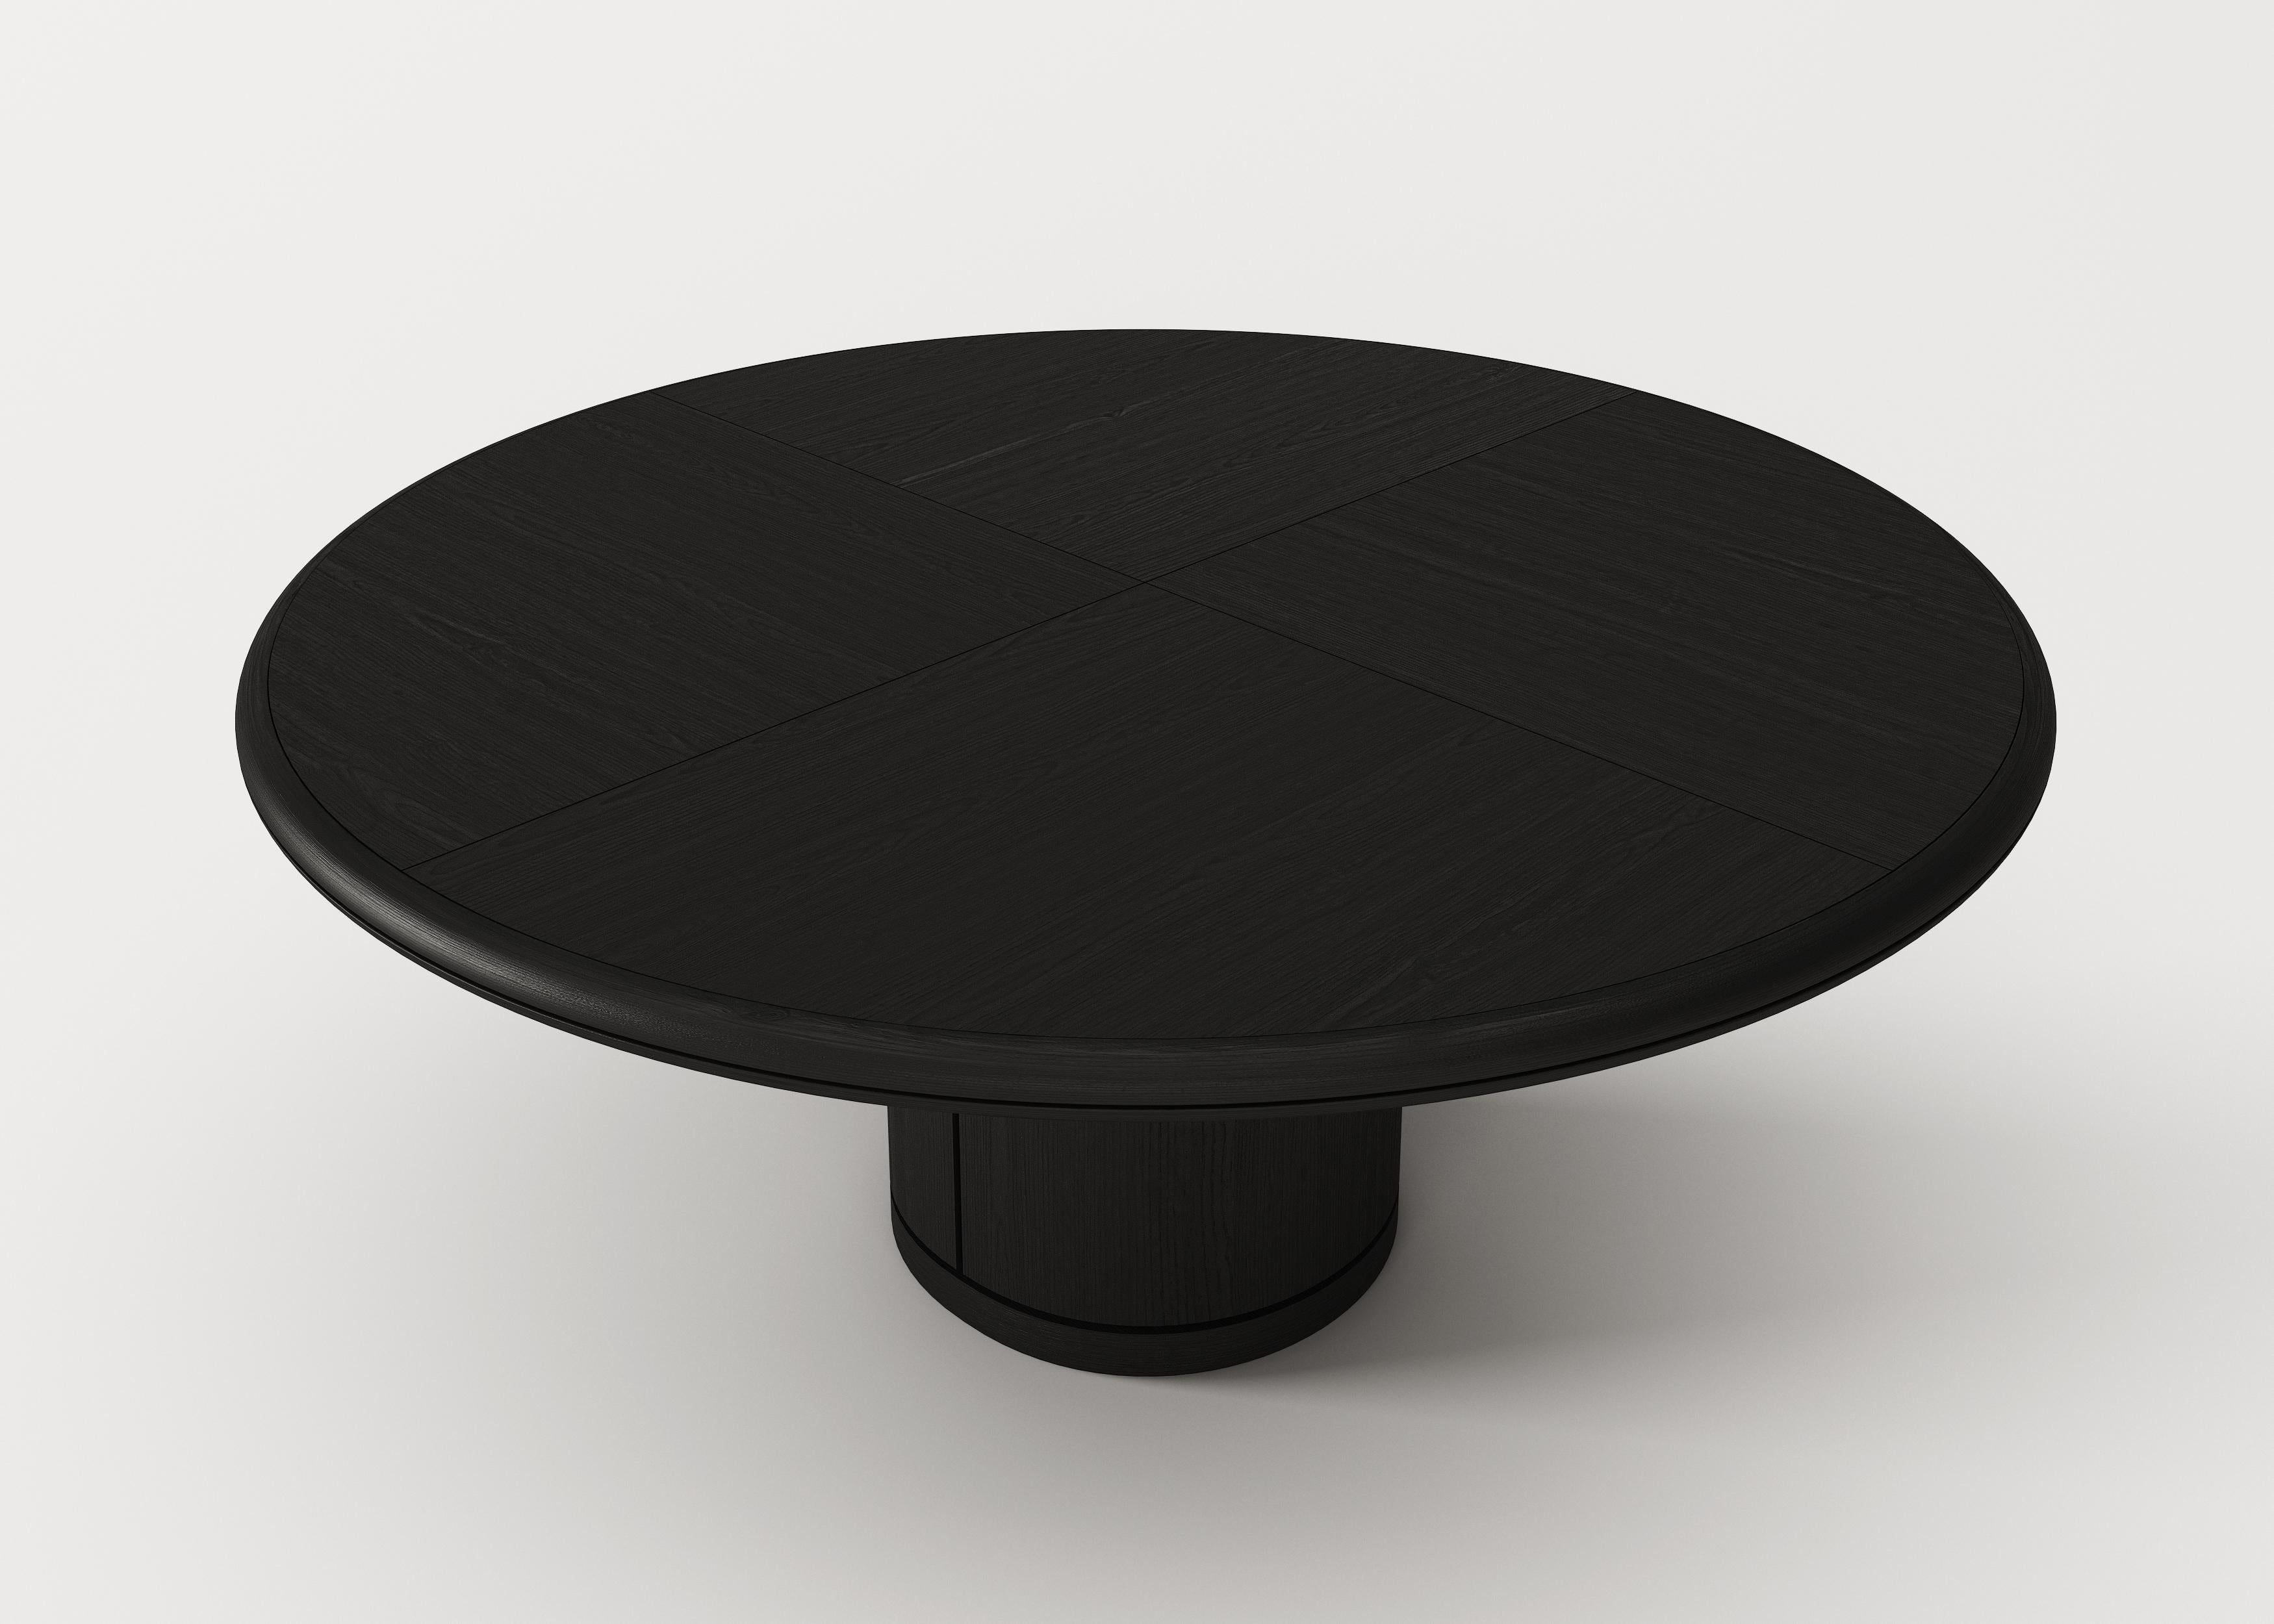 Moon black round table signed by Buket Hos¸can Bazman
Dimensions: Ø 160 x 75 cm
Material: Sandblasted blackened oak dining table

Available in custom sizing and finishes.

Buket Hoscan Bazman was born in Izmir, Turkey, in 1989. Graduated at